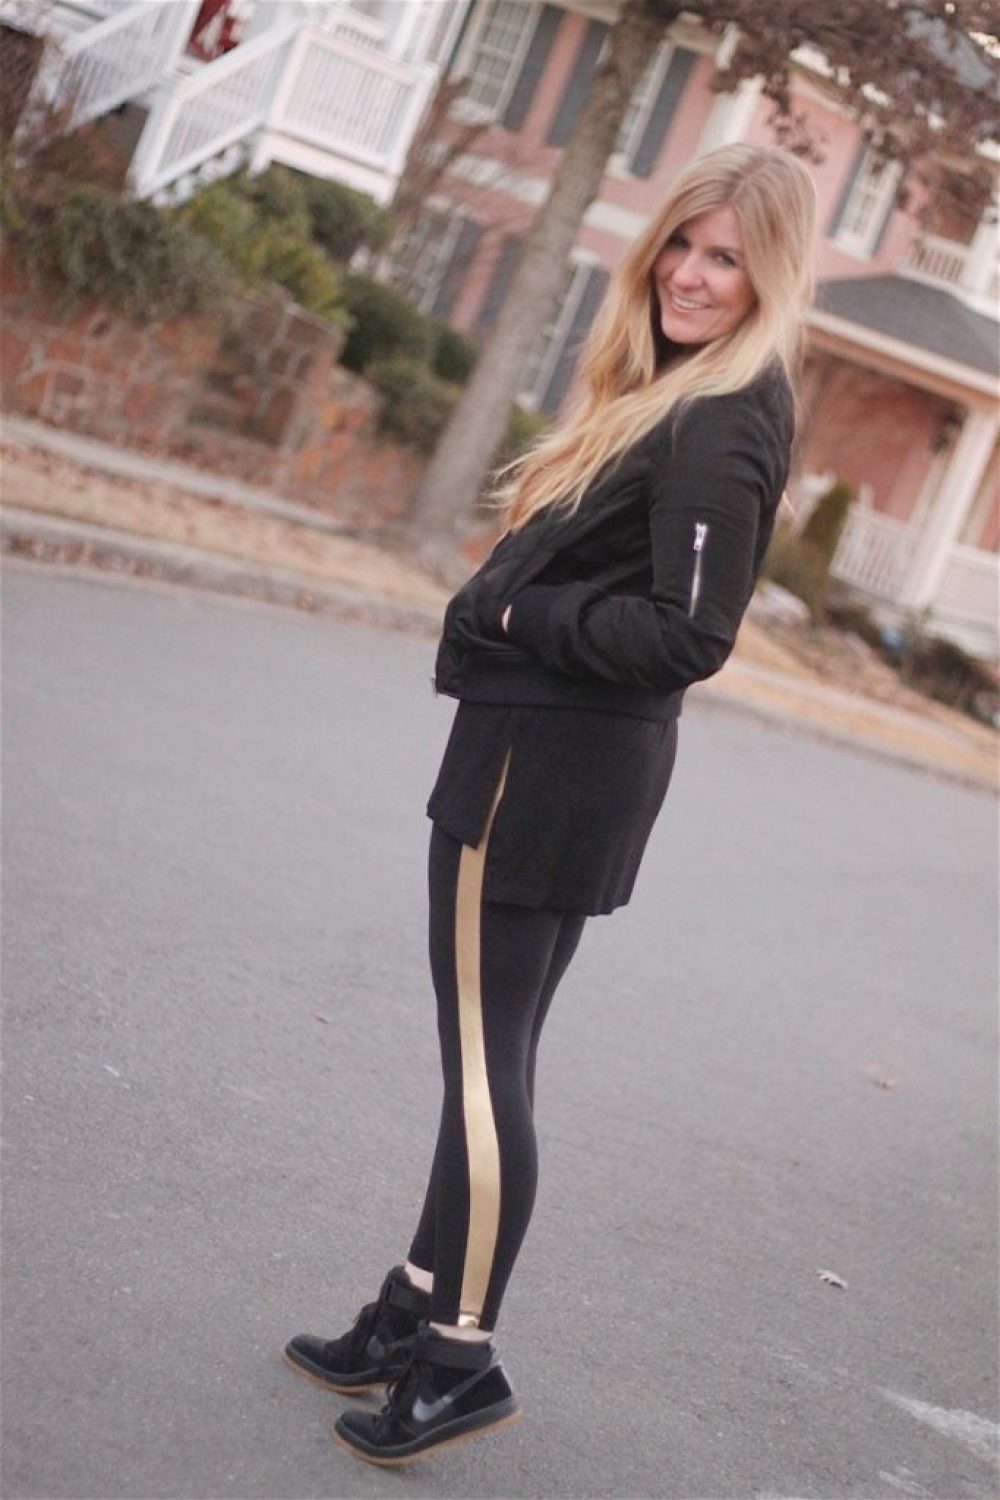 A New Year in Gold-Striped Workout Pants